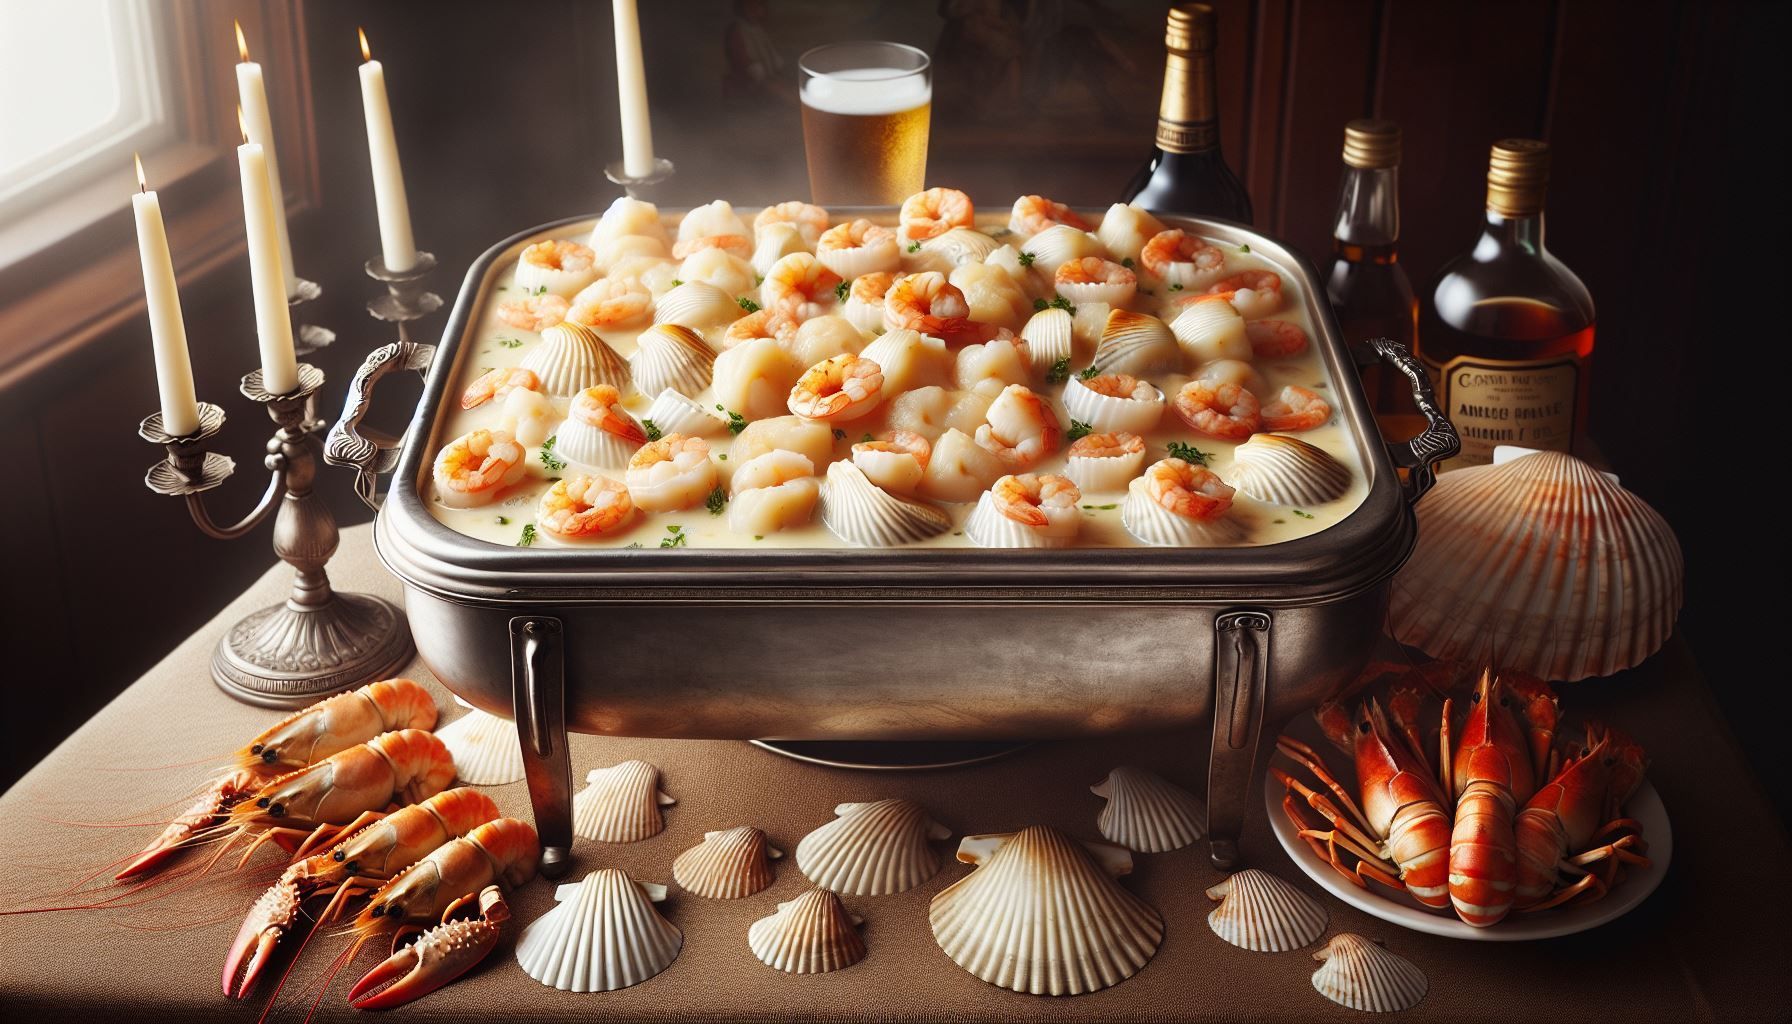 A casserole dish filled with shrimp and scallops sits on a table surrounded by seashells and candles.